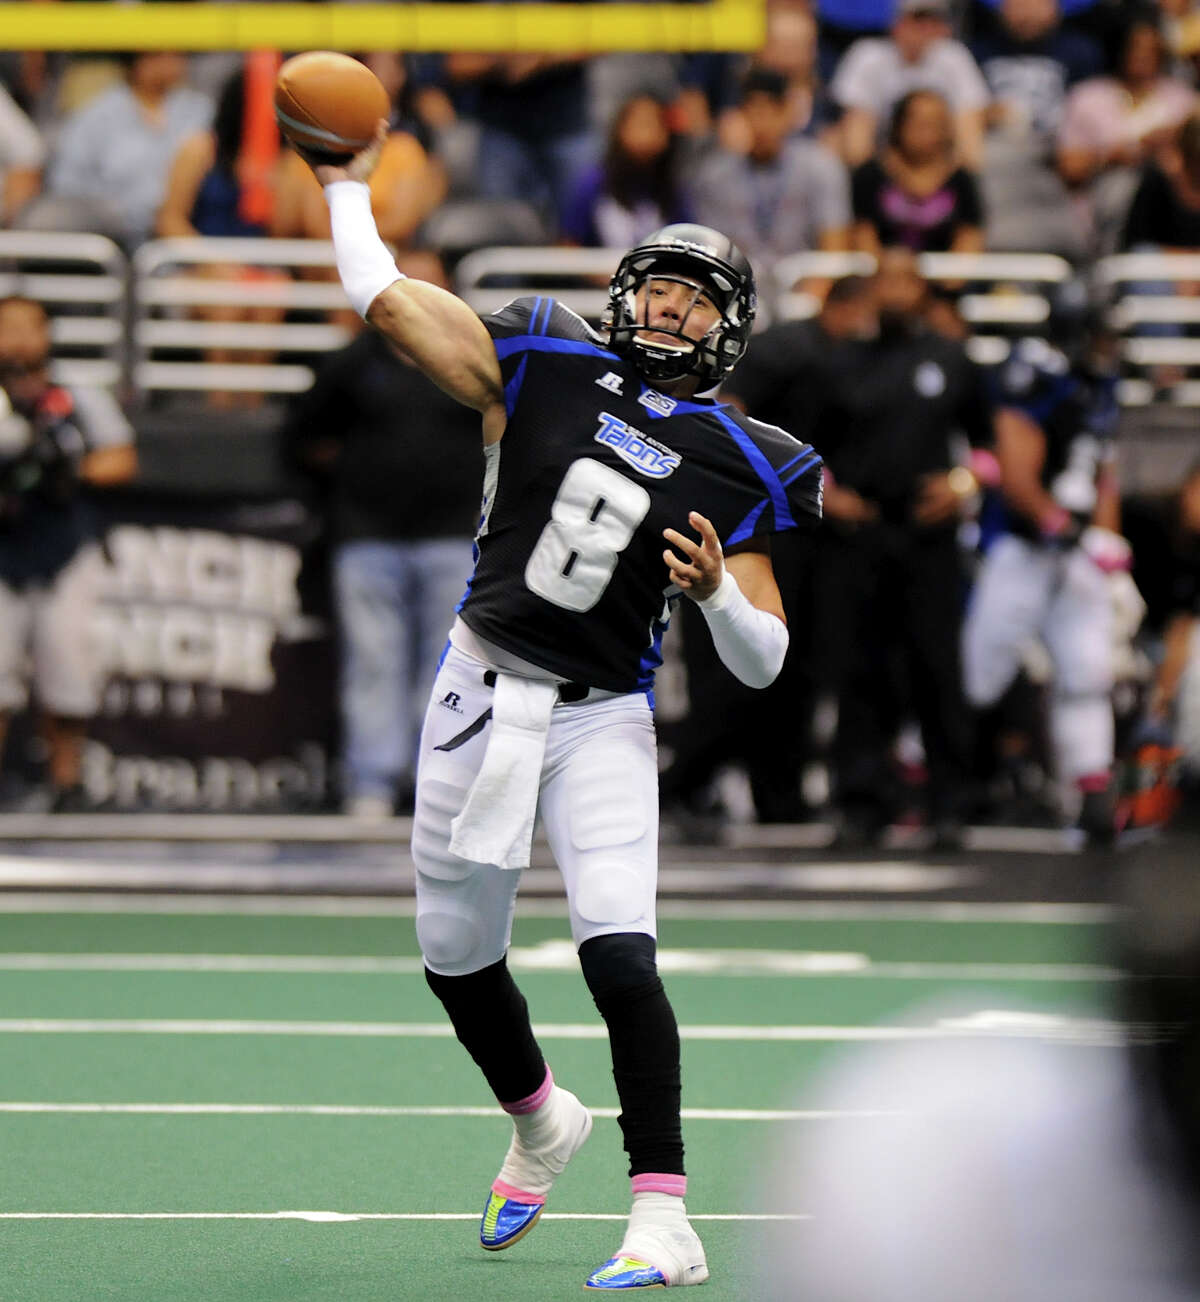 San Antonio Talons quarterback Aaron Garcia (8) throws a touchdown pass during an Arena Football League (AFL) game between the San Antonio Talons and the Pittsburgh Power on May 12, 2012 at the Alamodome in San Antonio Texas. John Albright / Special to the Express-News.